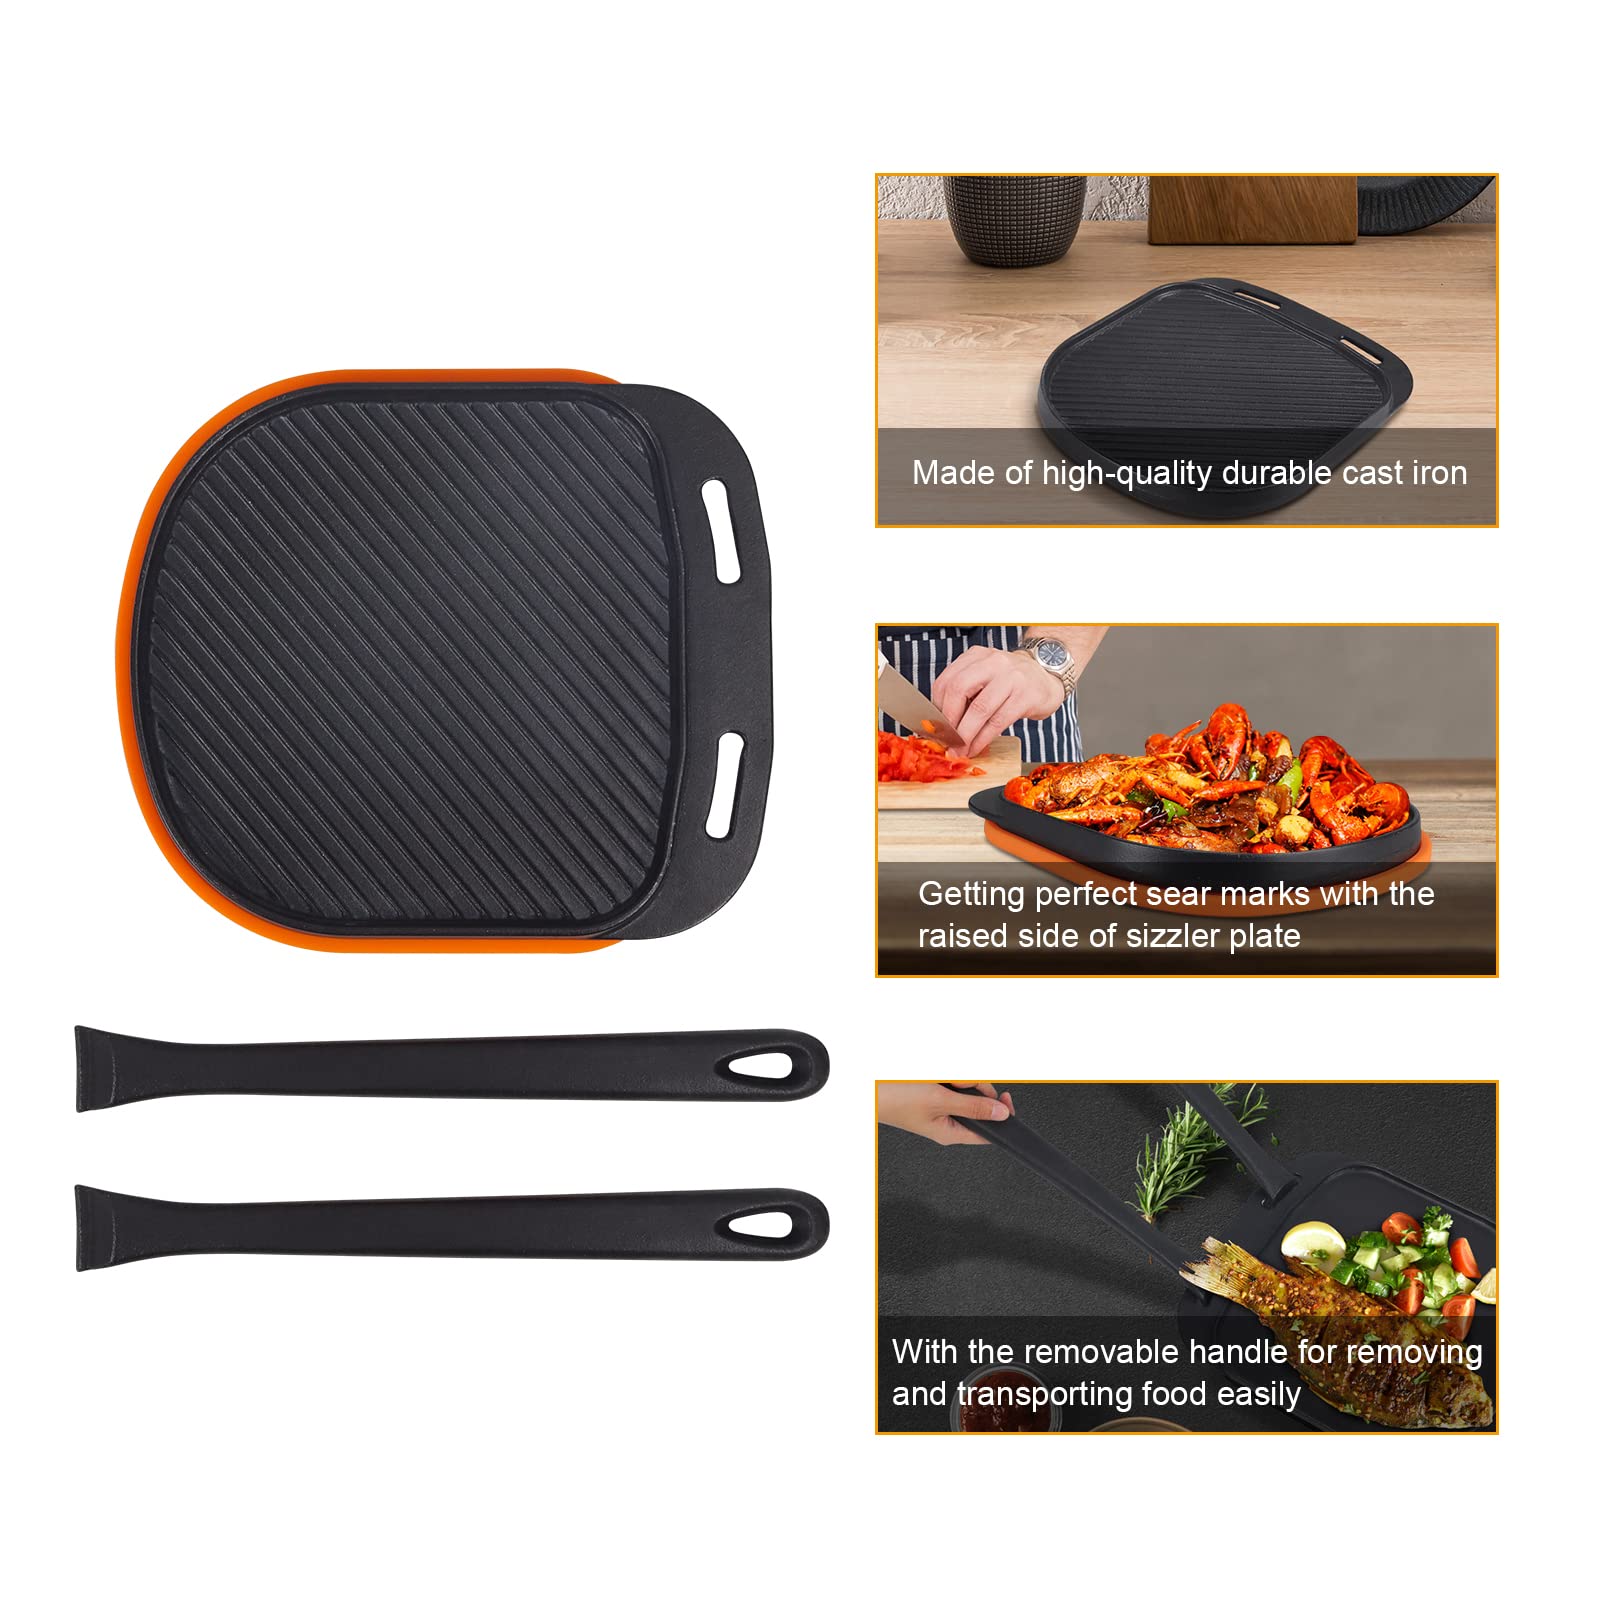 BBQ-PLUS Reversible Cast Iron Sizzler Plates, 13.7 Inch Lifting Handle, 12 Inch x 10.5 Inch, Black